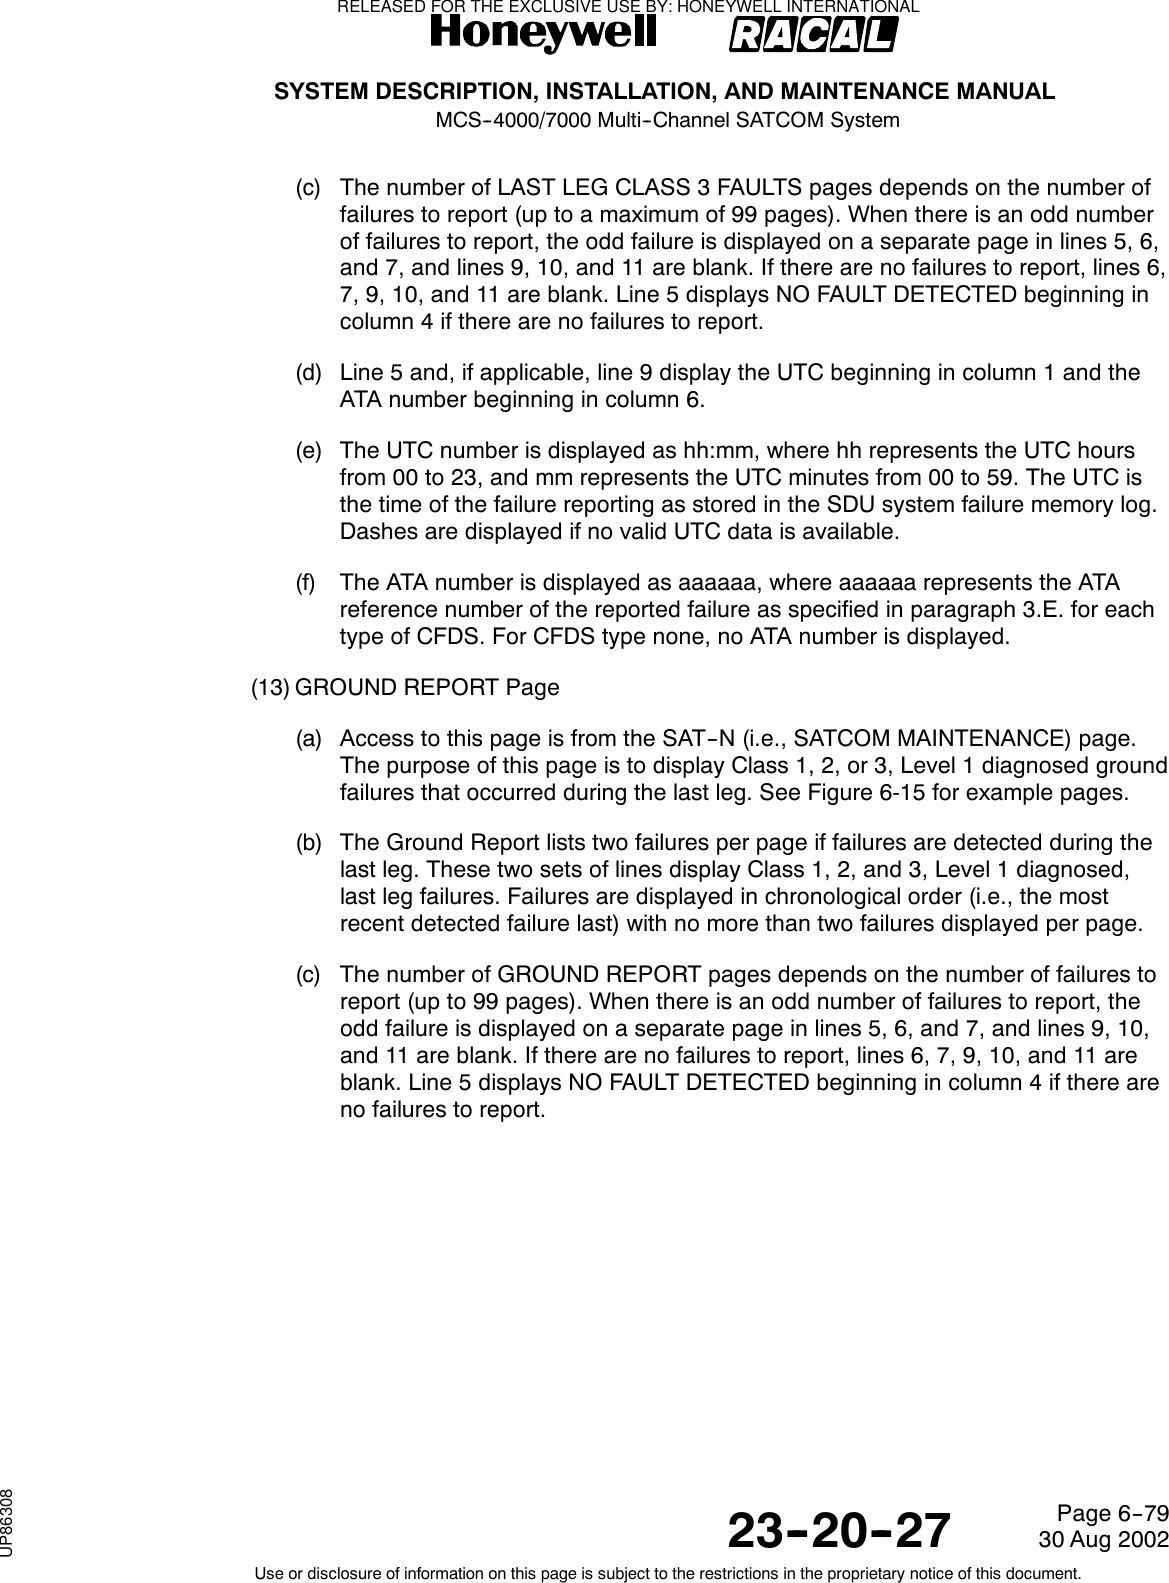 SYSTEM DESCRIPTION, INSTALLATION, AND MAINTENANCE MANUALMCS--4000/7000 Multi--Channel SATCOM System23--20--2730 Aug 2002Use or disclosure of information on this page is subject to the restrictions in the proprietary notice of this document.Page 6--79(c) The number of LAST LEG CLASS 3 FAULTS pages depends on the number offailures to report (up to a maximum of 99 pages). When there is an odd numberof failures to report, the odd failure is displayed on a separate page in lines 5, 6,and 7, and lines 9, 10, and 11 are blank. If there are no failures to report, lines 6,7, 9, 10, and 11 are blank. Line 5 displays NO FAULT DETECTED beginning incolumn 4 if there are no failures to report.(d) Line 5 and, if applicable, line 9 display the UTC beginning in column 1 and theATA number beginning in column 6.(e) The UTC number is displayed as hh:mm, where hh represents the UTC hoursfrom 00 to 23, and mm represents the UTC minutes from 00 to 59. The UTC isthe time of the failure reporting as stored in the SDU system failure memory log.Dashes are displayed if no valid UTC data is available.(f) The ATA number is displayed as aaaaaa, where aaaaaa represents the ATAreference number of the reported failure as specified in paragraph 3.E. for eachtype of CFDS. For CFDS type none, no ATA number is displayed.(13) GROUND REPORT Page(a) Access to this page is from the SAT--N (i.e., SATCOM MAINTENANCE) page.The purpose of this page is to display Class 1, 2, or 3, Level 1 diagnosed groundfailures that occurred during the last leg. See Figure 6-15 for example pages.(b) The Ground Report lists two failures per page if failures are detected during thelast leg. These two sets of lines display Class 1, 2, and 3, Level 1 diagnosed,last leg failures. Failures are displayed in chronological order (i.e., the mostrecent detected failure last) with no more than two failures displayed per page.(c) The number of GROUND REPORT pages depends on the number of failures toreport (up to 99 pages). When there is an odd number of failures to report, theodd failure is displayed on a separate page in lines 5, 6, and 7, and lines 9, 10,and 11 are blank. If there are no failures to report, lines 6, 7, 9, 10, and 11 areblank. Line 5 displays NO FAULT DETECTED beginning in column 4 if there areno failures to report.RELEASED FOR THE EXCLUSIVE USE BY: HONEYWELL INTERNATIONALUP86308